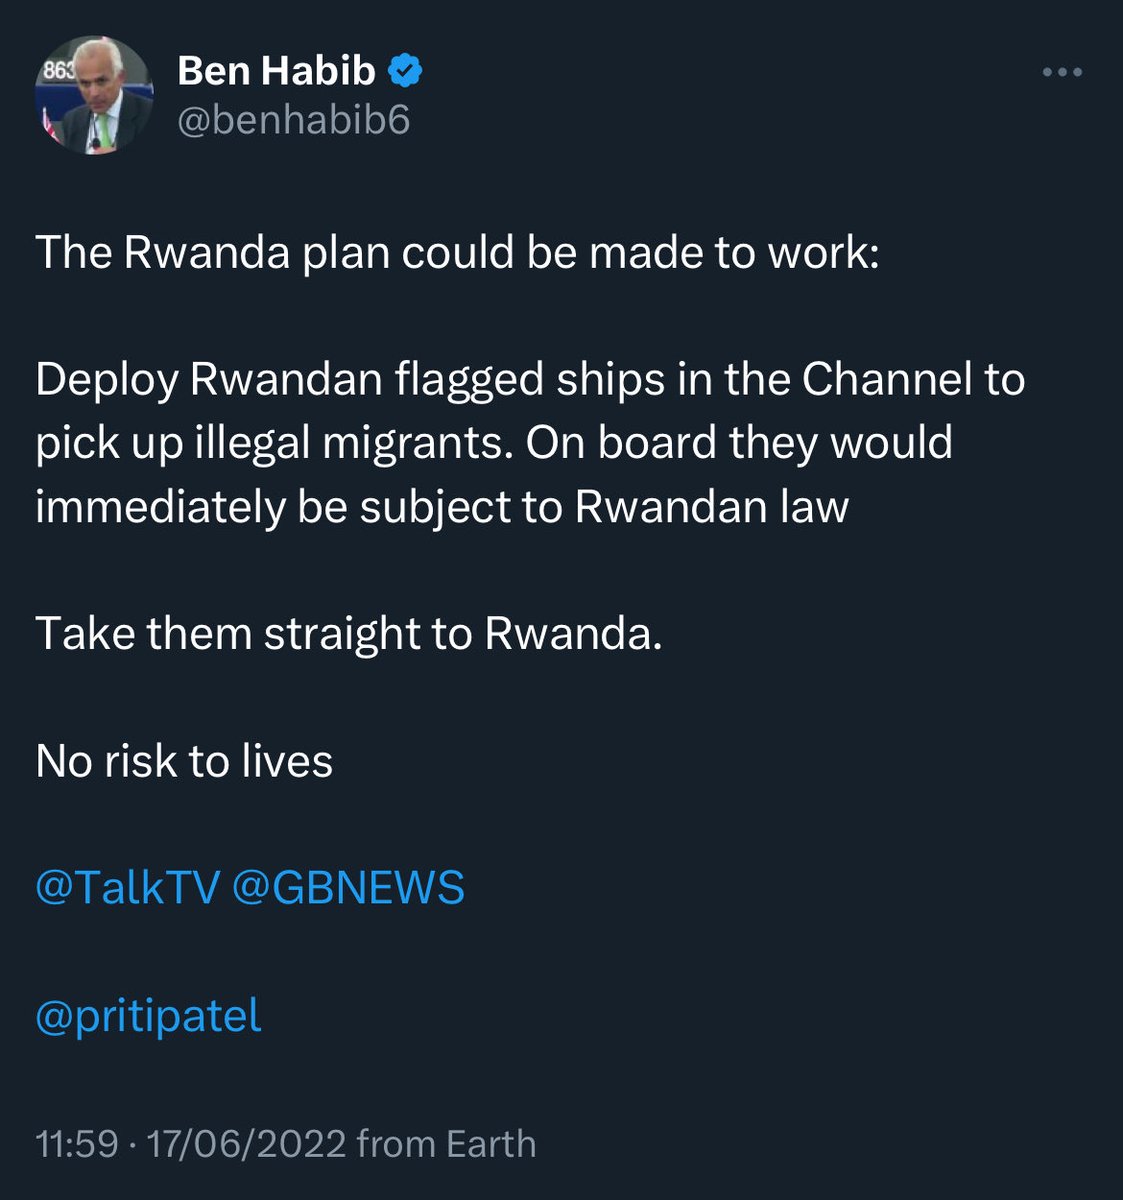 @JuliaHB1 This is the guy who suggested Rwandan flagged ships (a landlocked country), pick people up in the channel (under Rwandan law apparently) and take them to Rwanda. Where to even begin 🤦‍♂️